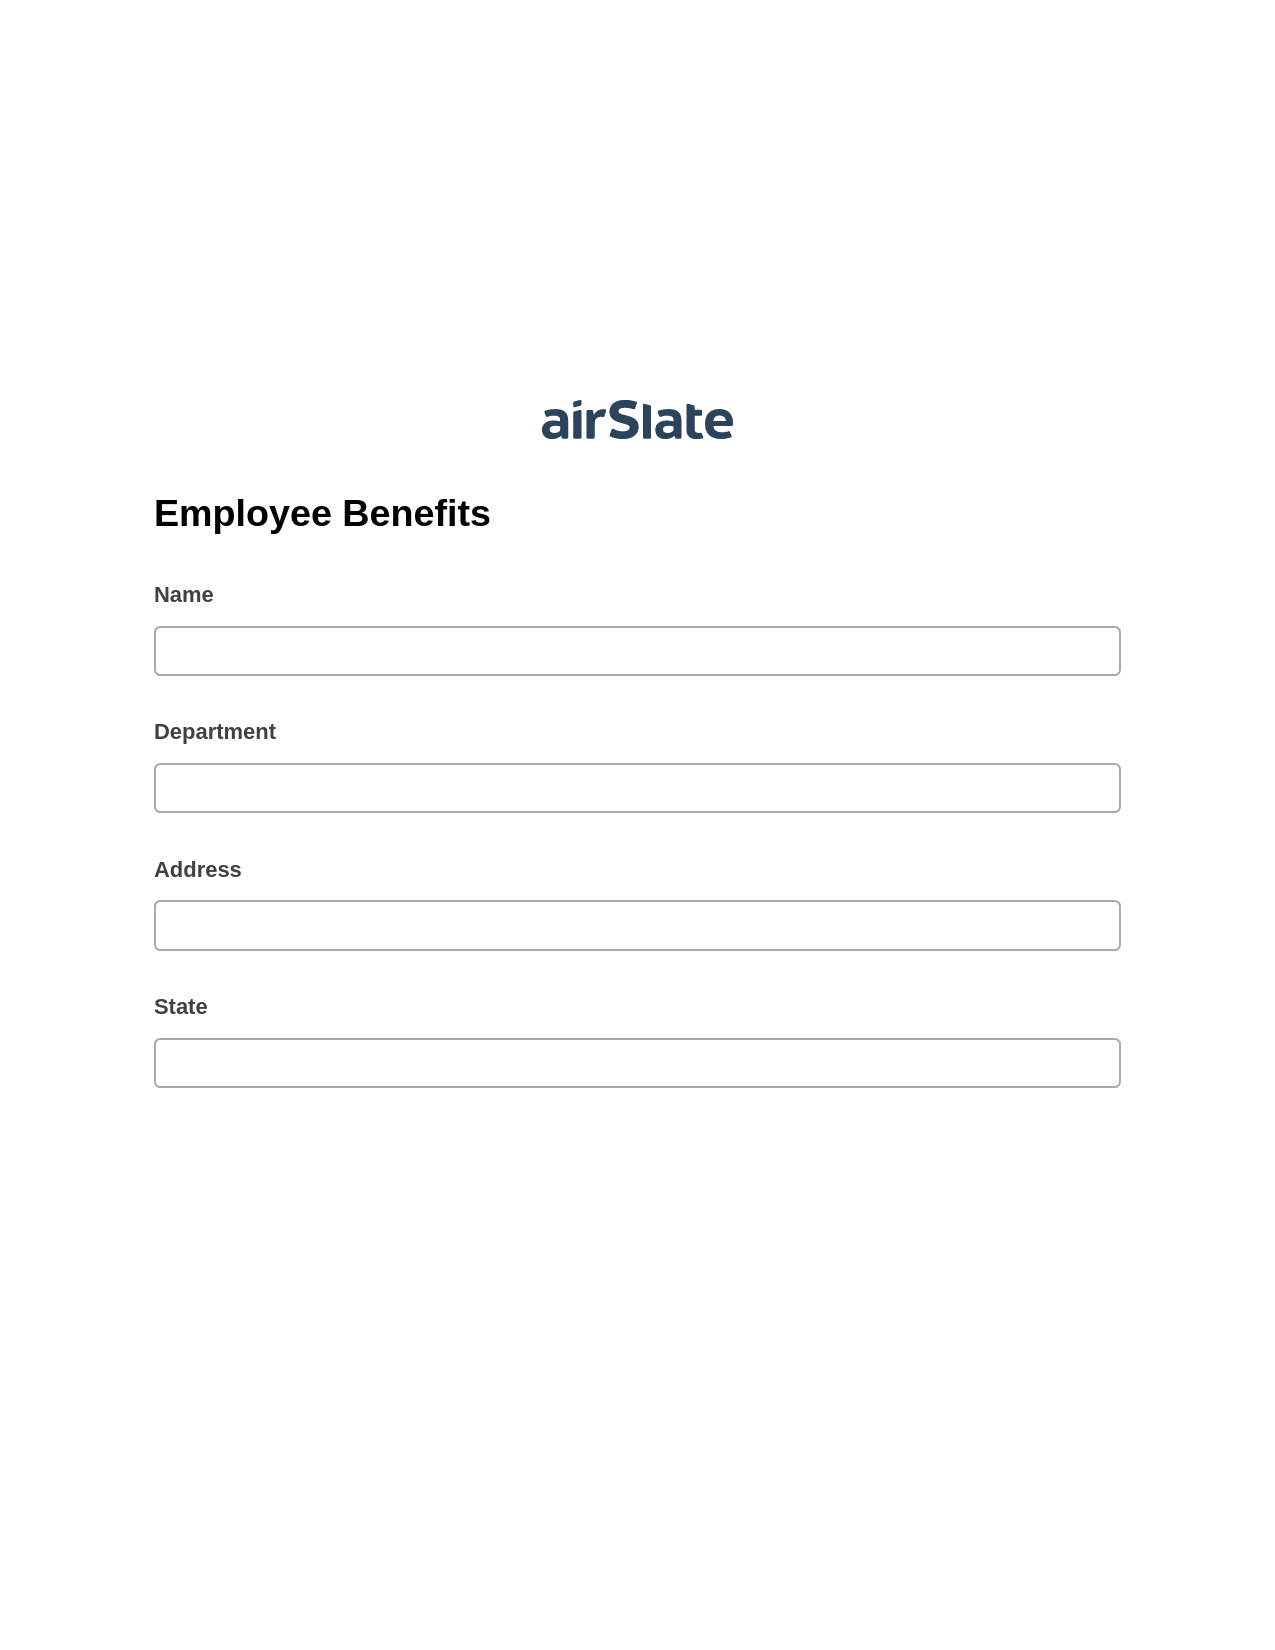 Employee Benefits Pre-fill from another Slate Bot, Update MS Dynamics 365 Records Bot, Dropbox Bot